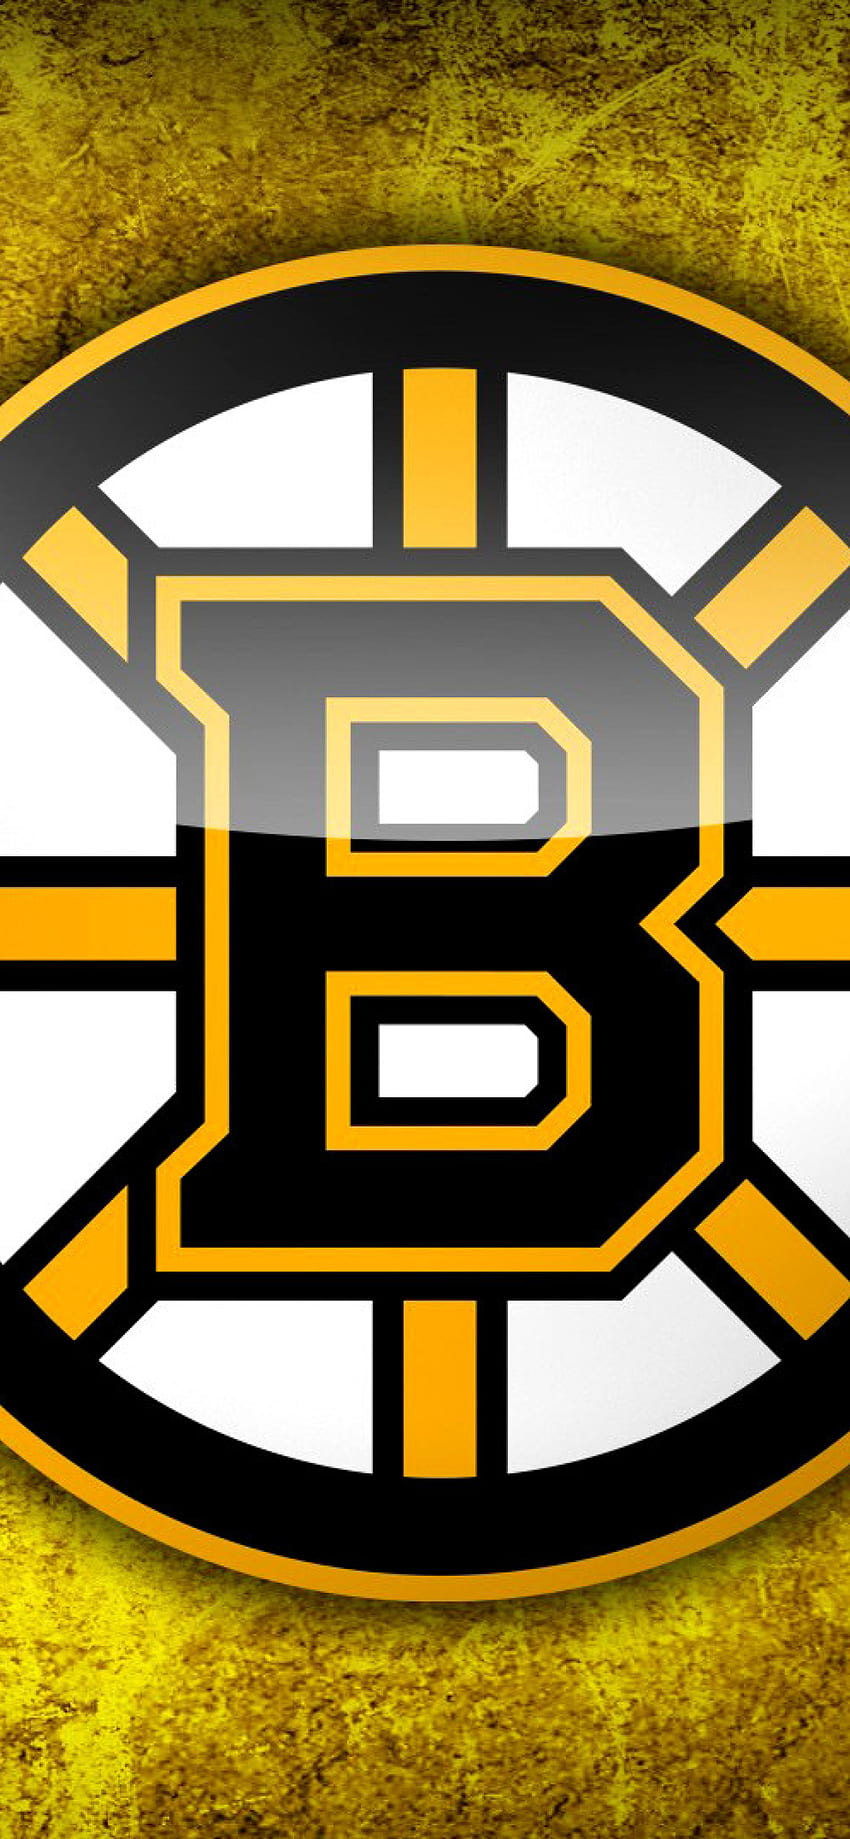 Boston Bruins - 6⃣3⃣ here to grace those backgrounds.... | Facebook